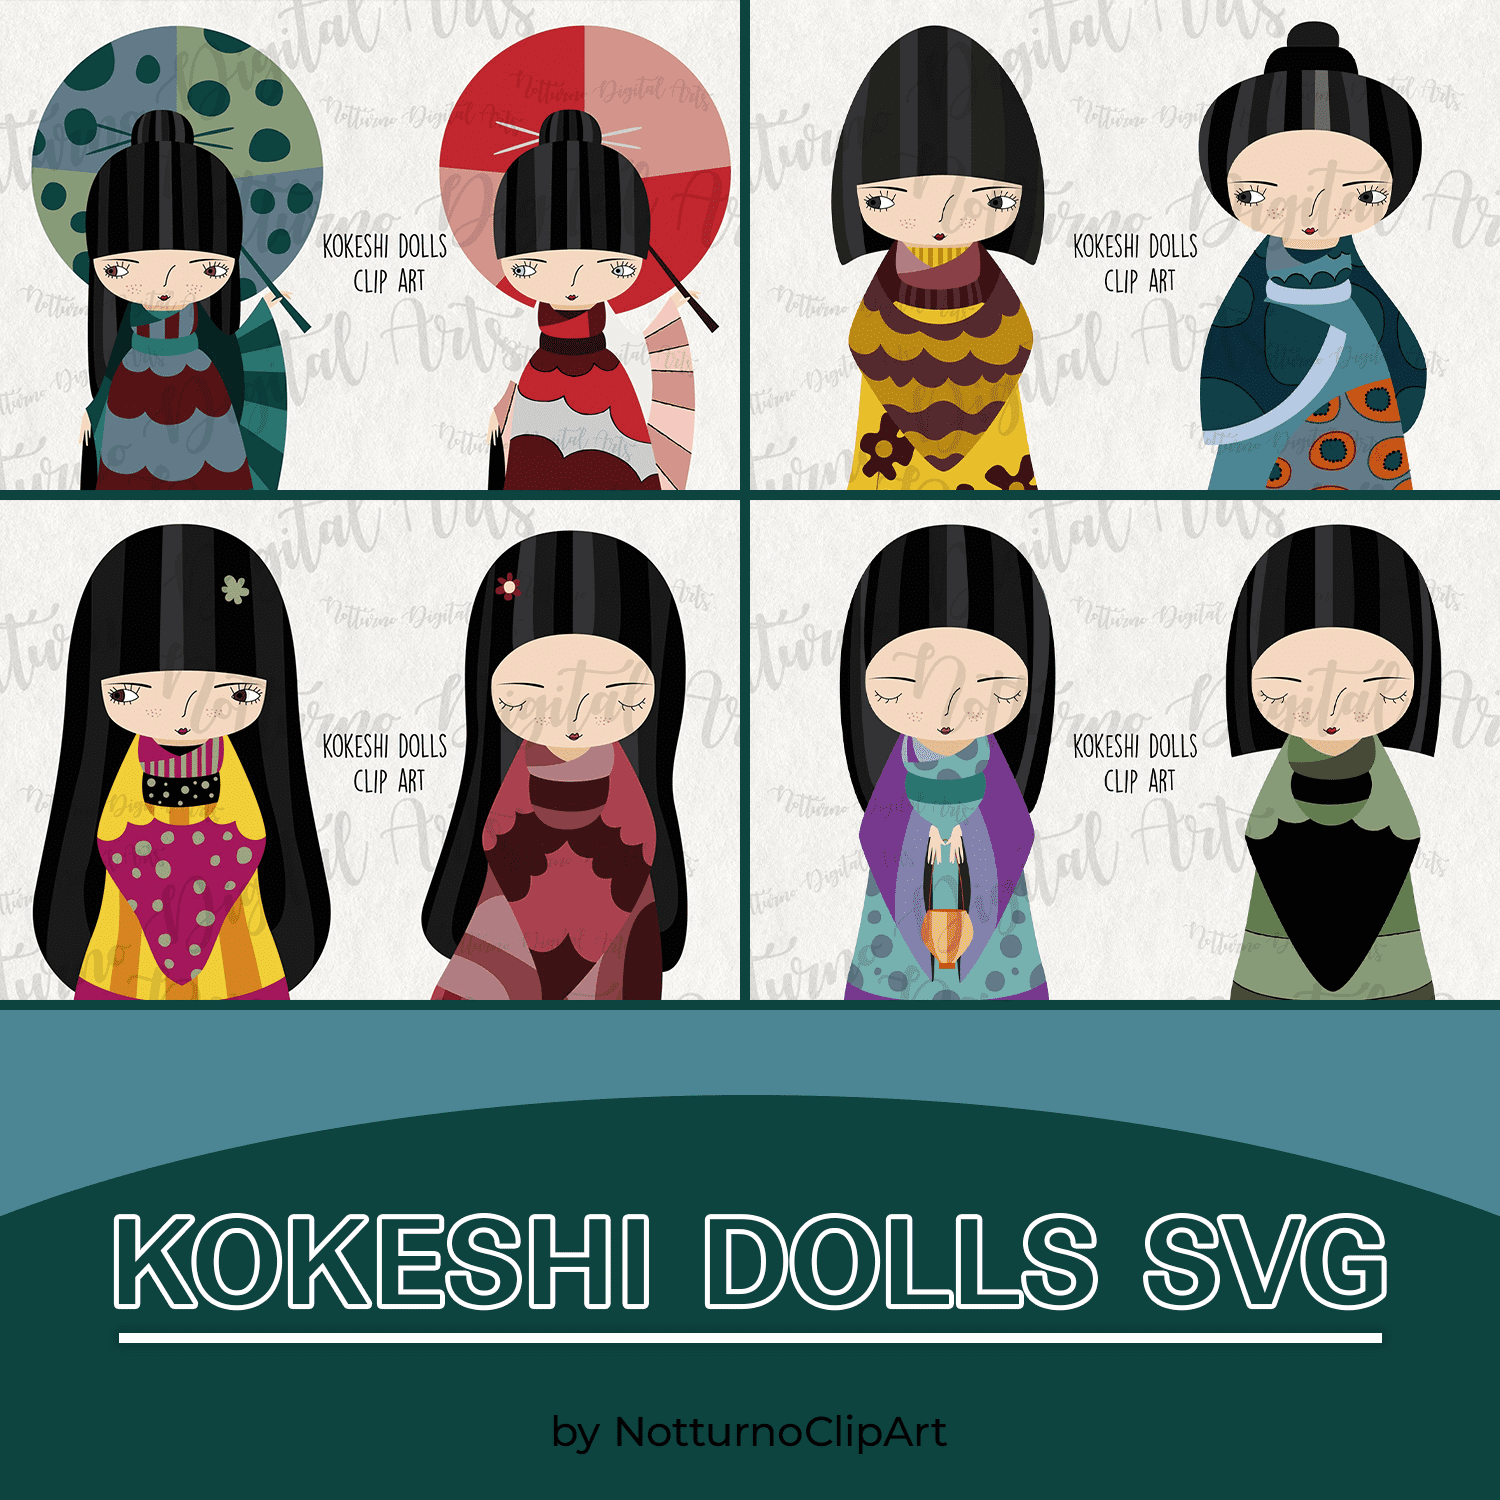 Kokeshi Dolls SVG created by NotturnoClipArt.